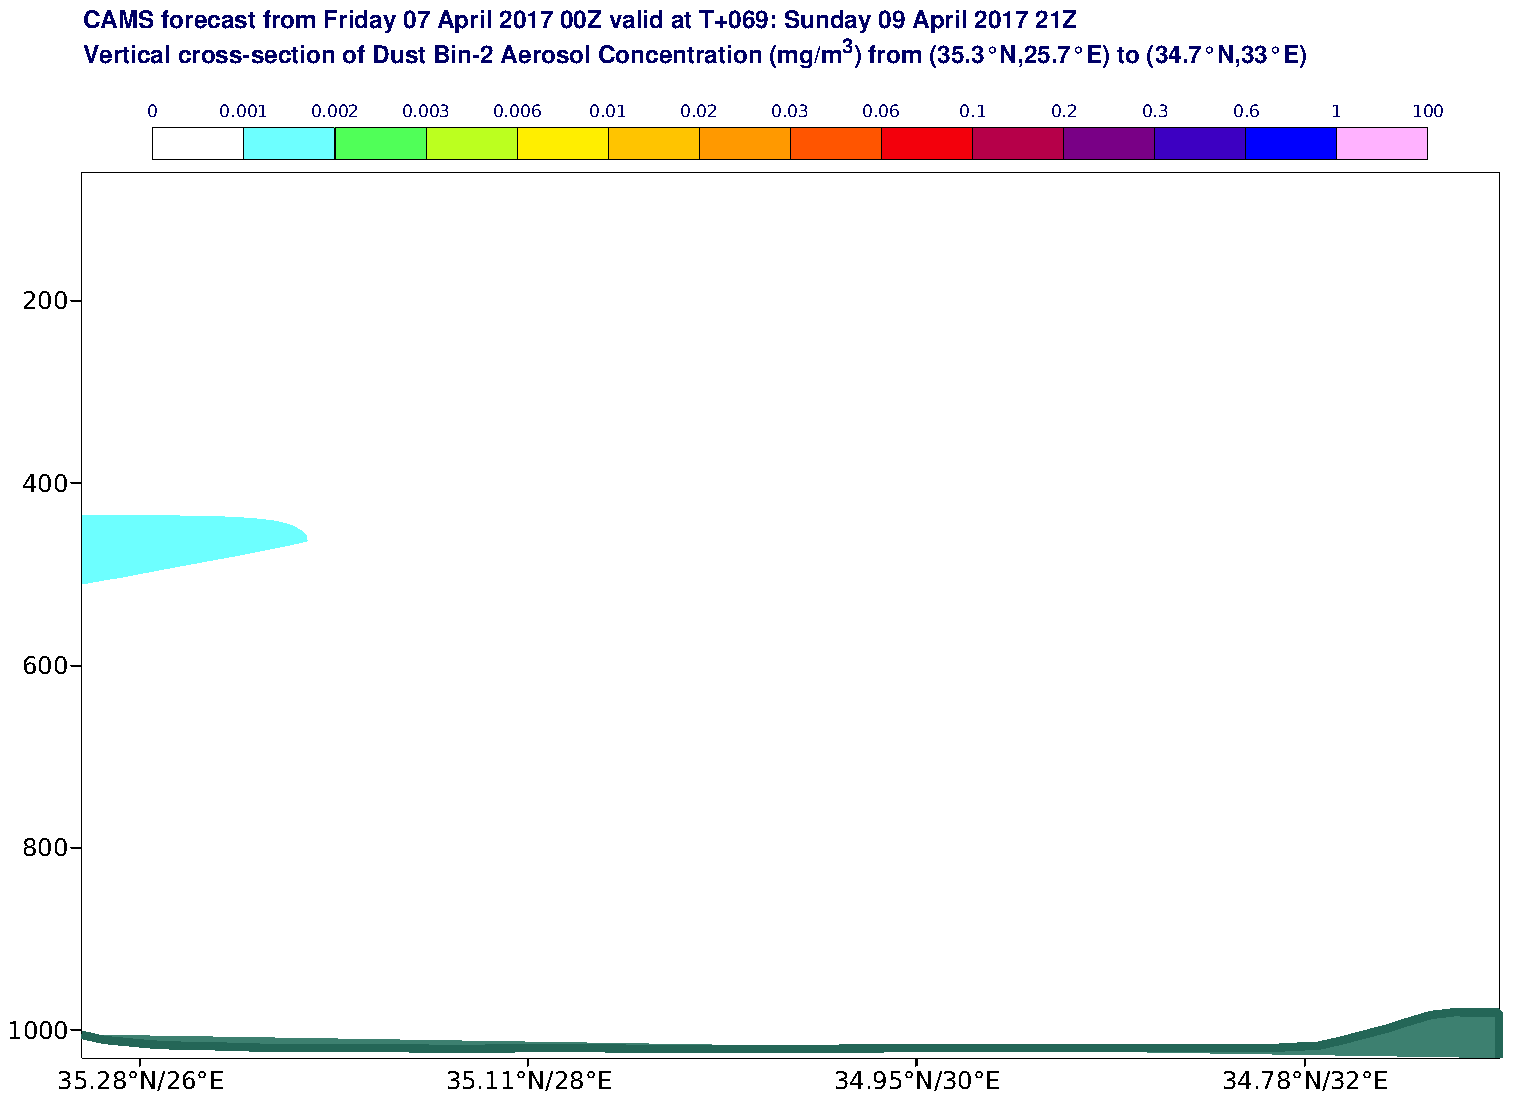 Vertical cross-section of Dust Bin-2 Aerosol Concentration (mg/m3) valid at T69 - 2017-04-09 21:00